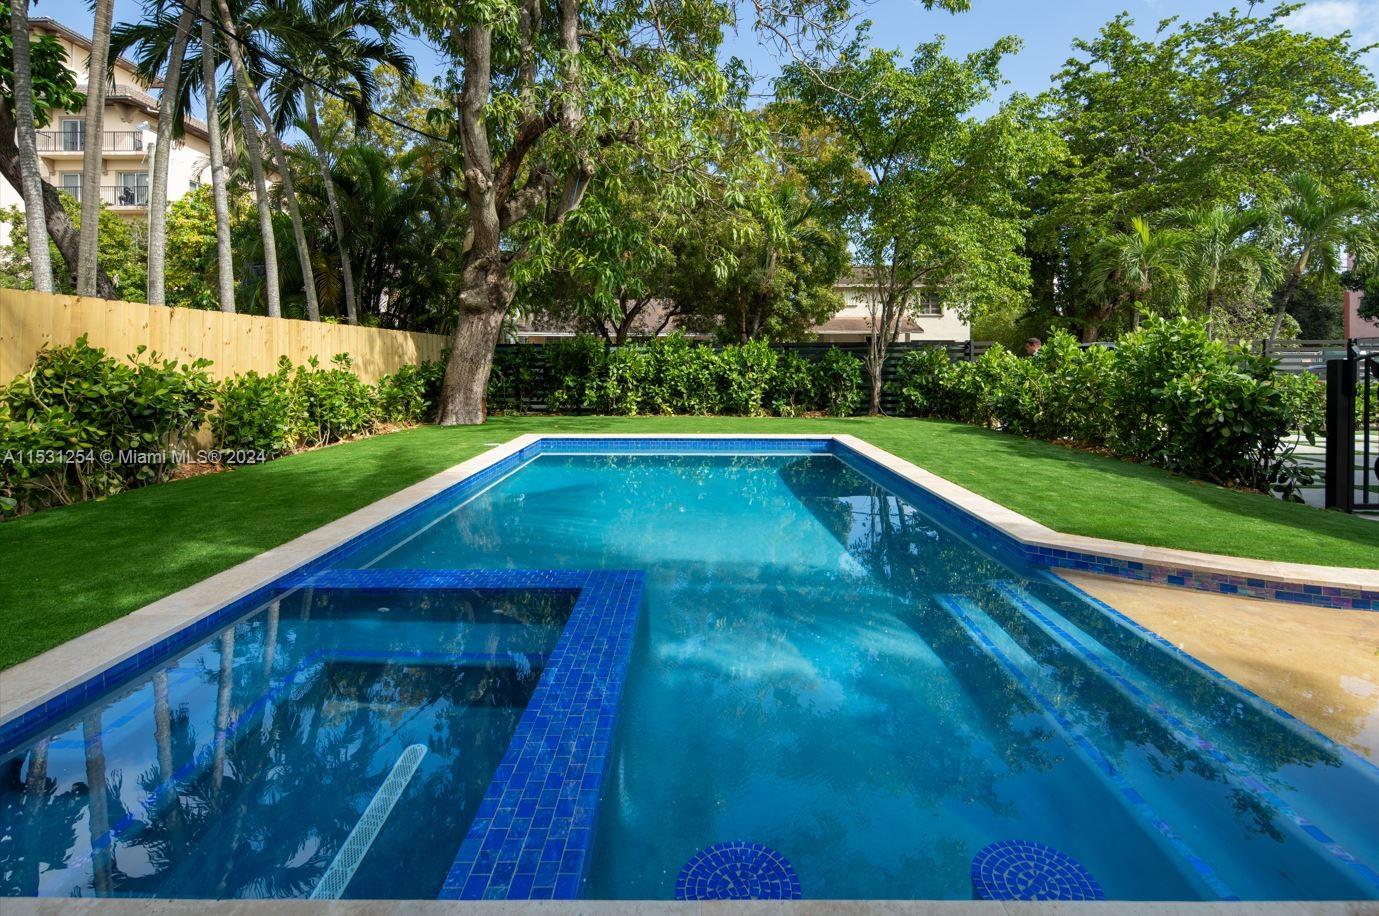 a view of backyard with swimming pool and green space